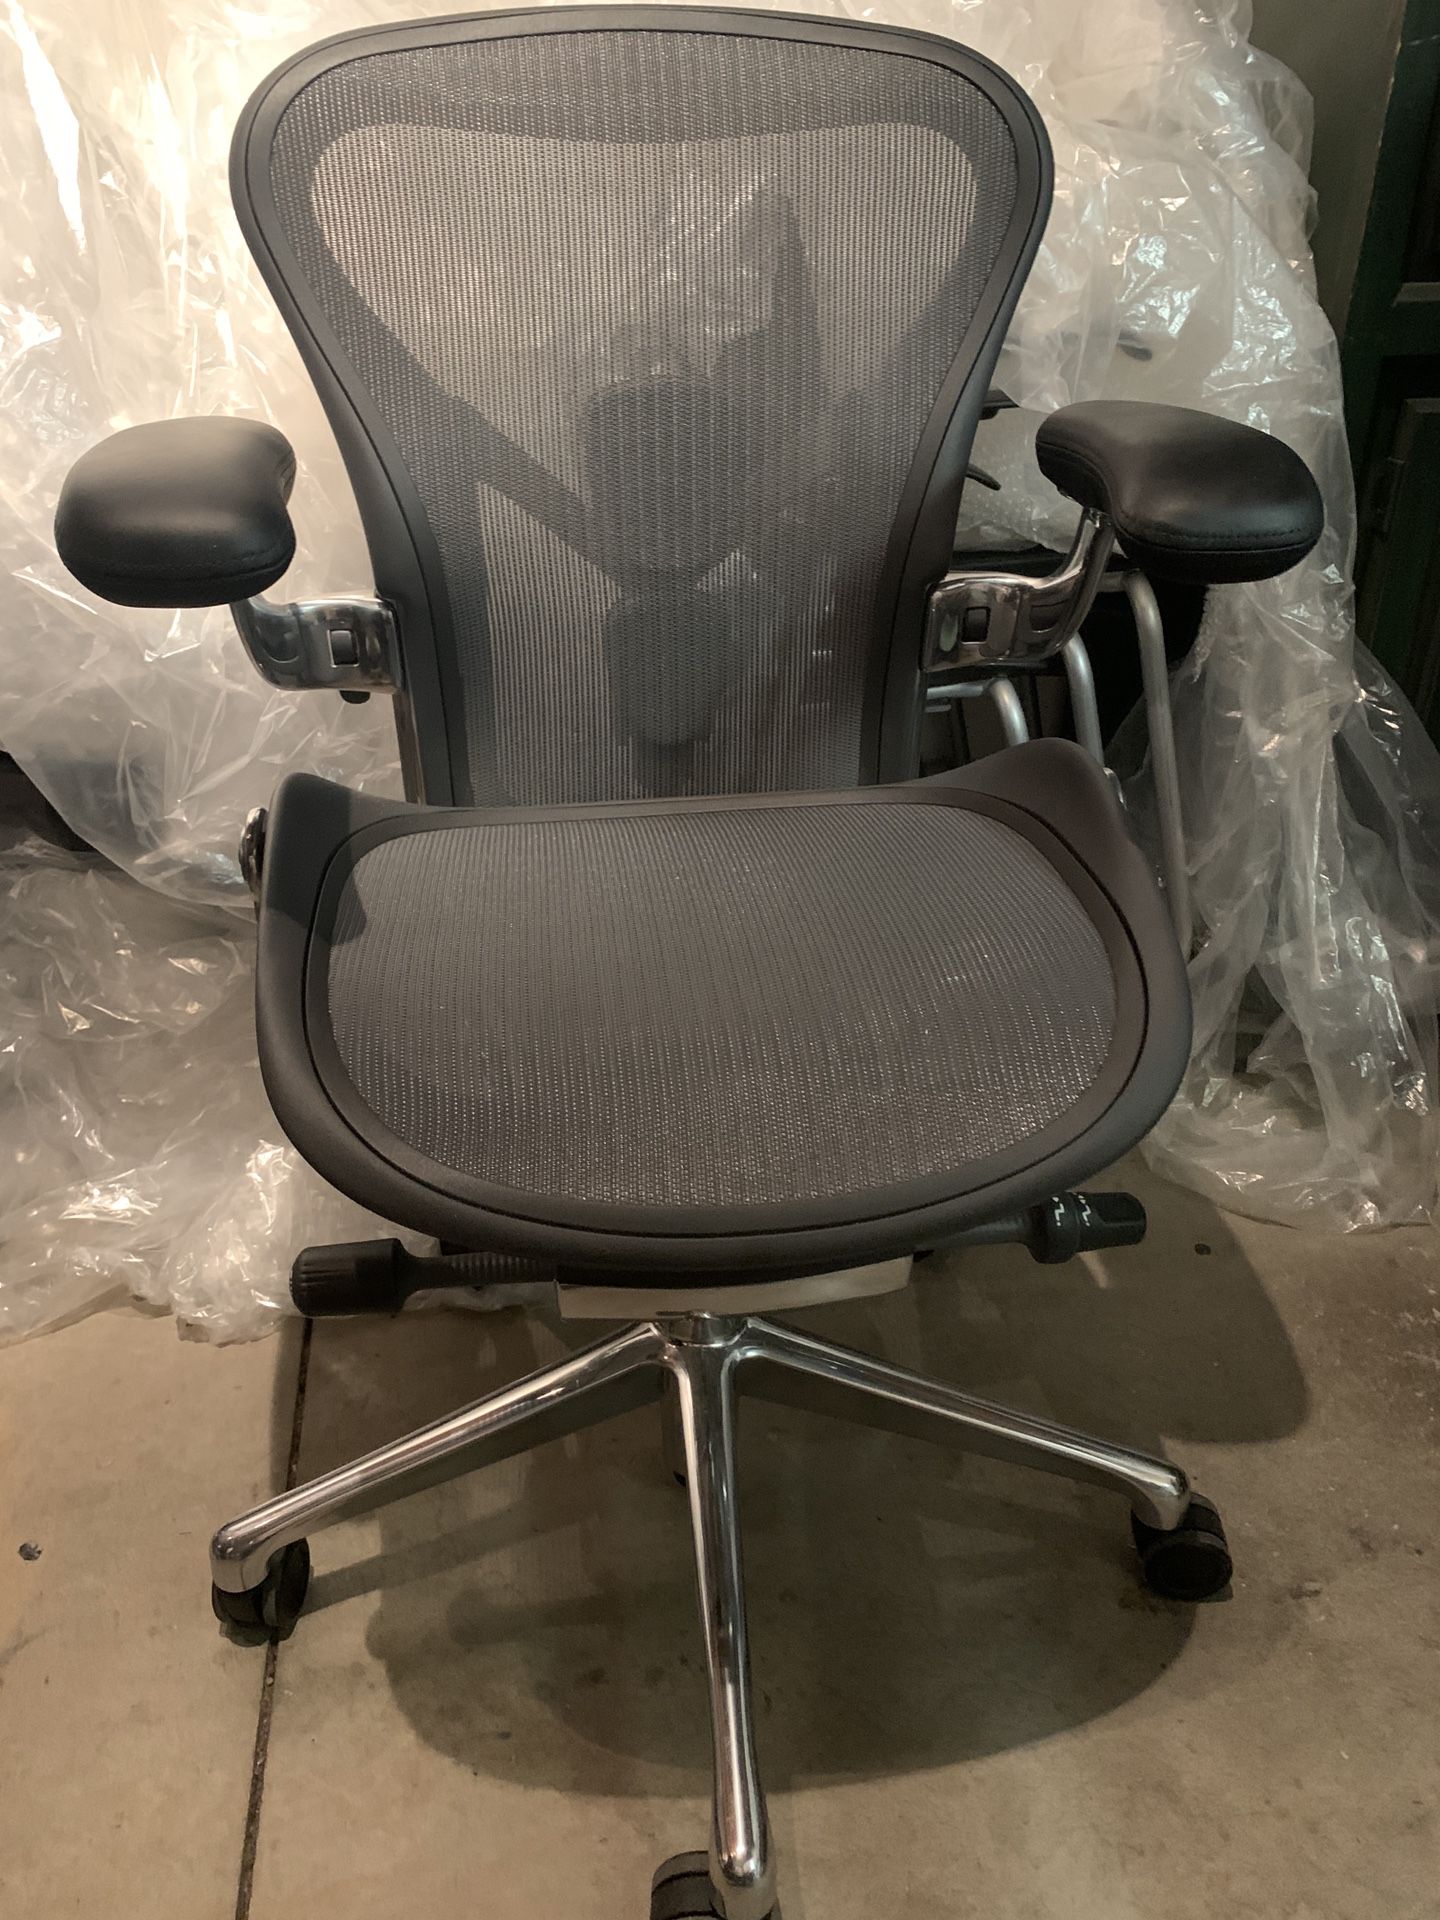 BRAND NEW Herman Miller Remastered Aeron Polished Aluminum Leather Armrests Size A anFully Loaded Posture Fit SL Ergonomic Office Chair Work From Home